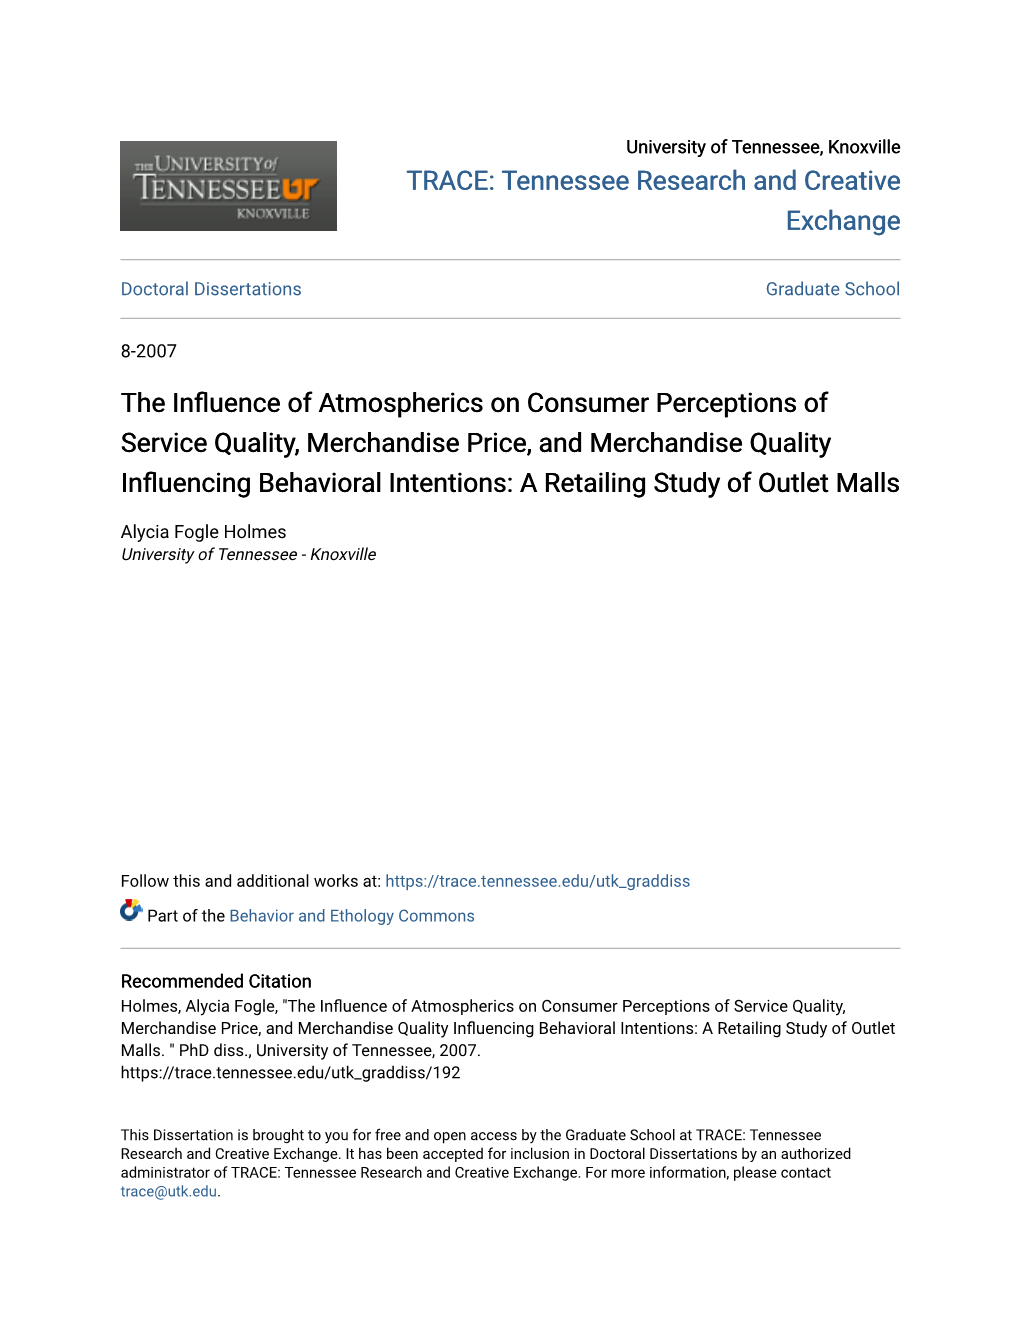 The Influence of Atmospherics on Consumer Perceptions of Service